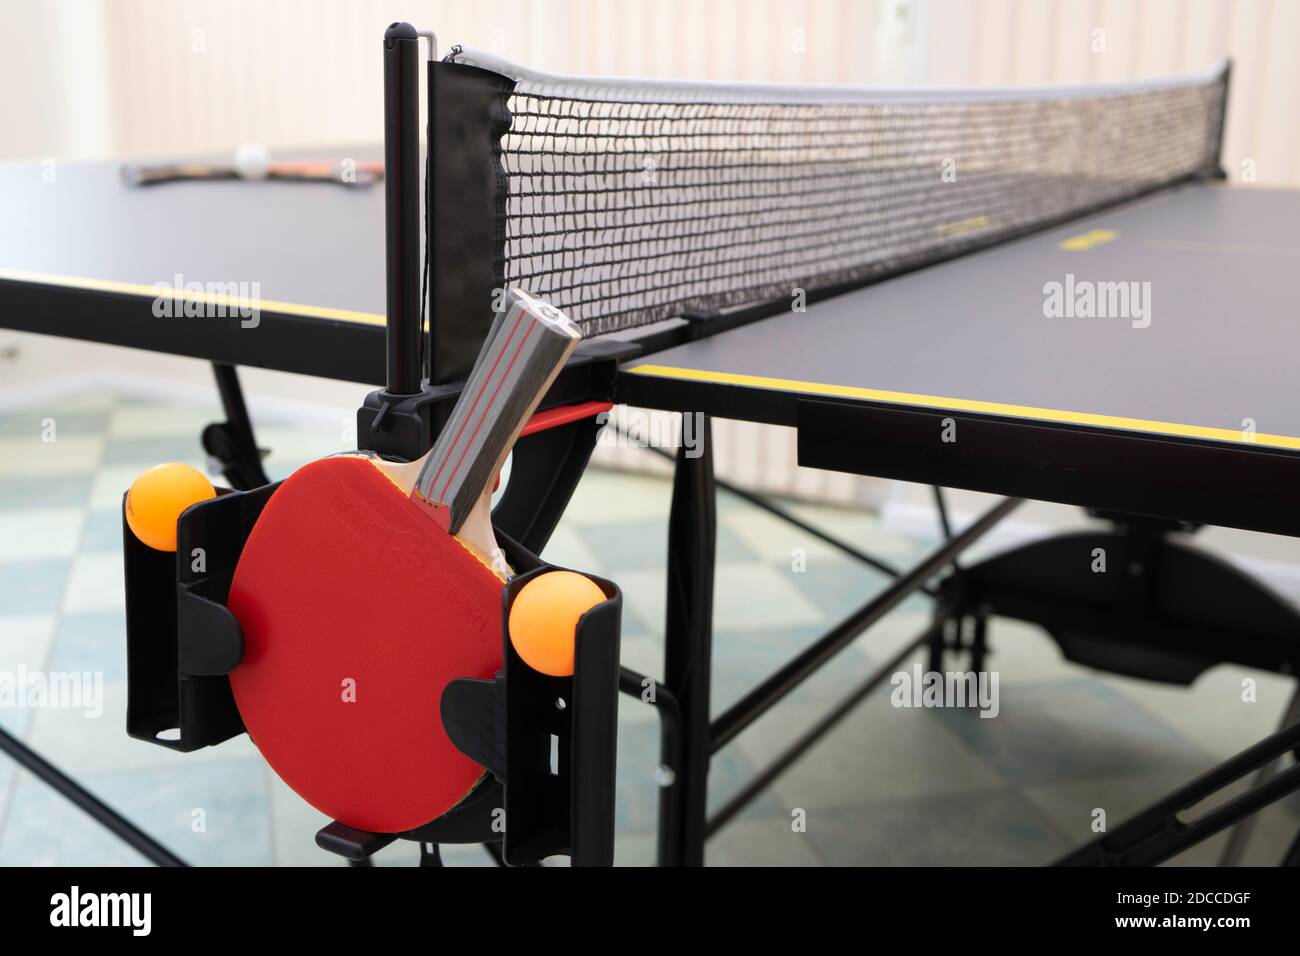 https://c8.alamy.com/comp/2DCCDGF/an-angled-side-view-of-a-table-tennis-table-and-net-with-a-red-table-tennis-bat-and-two-orange-table-tennis-balls-in-a-holder-and-two-more-table-tenni-2DCCDGF.jpg